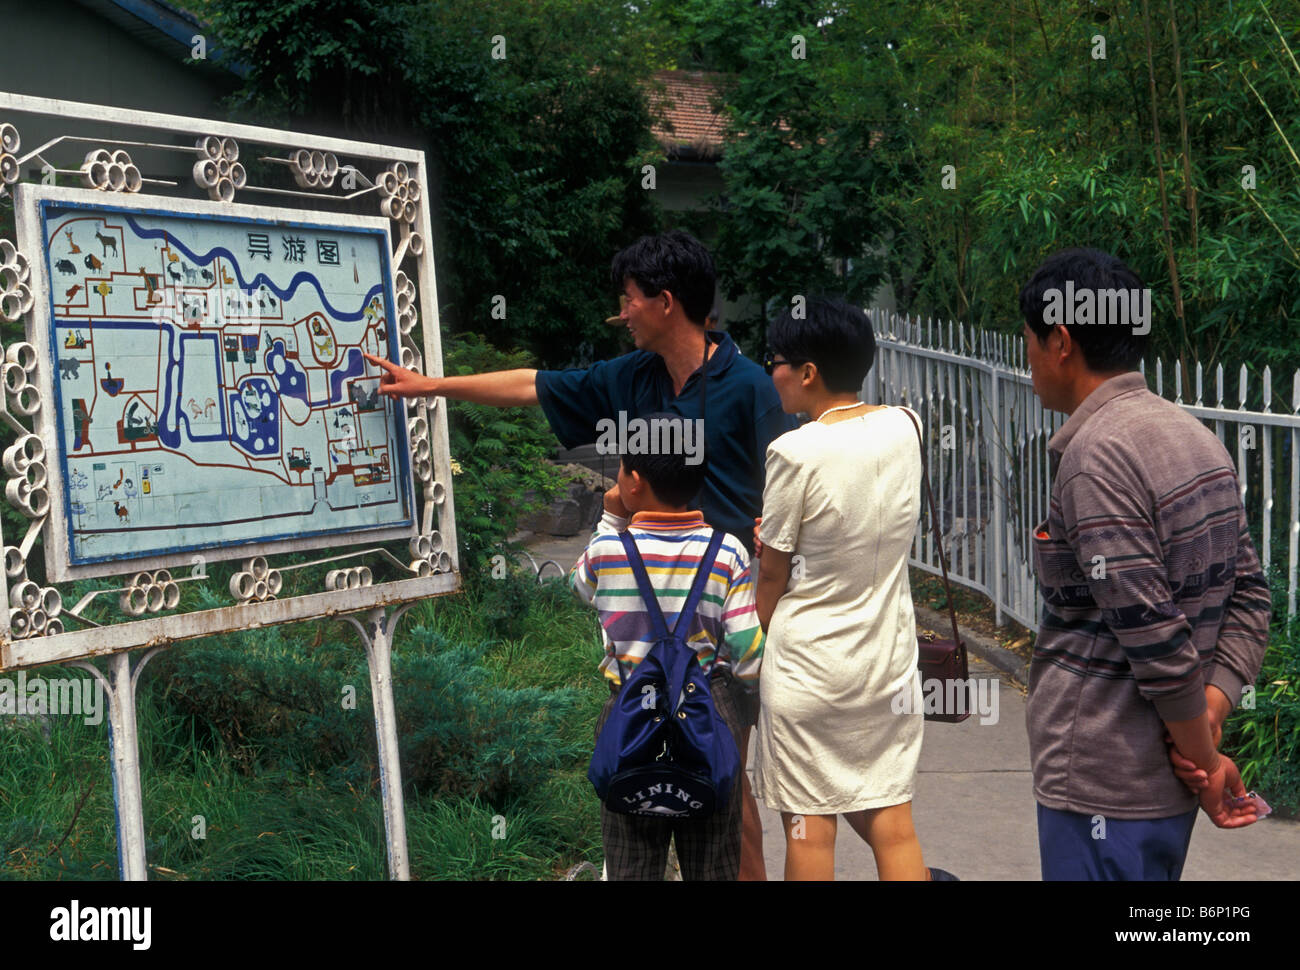 Chinese people, Chinese family, father, mother, son, tourists, visitors, looking at map, zoo, Beijing, Beijing Municipality, China, Asia Stock Photo